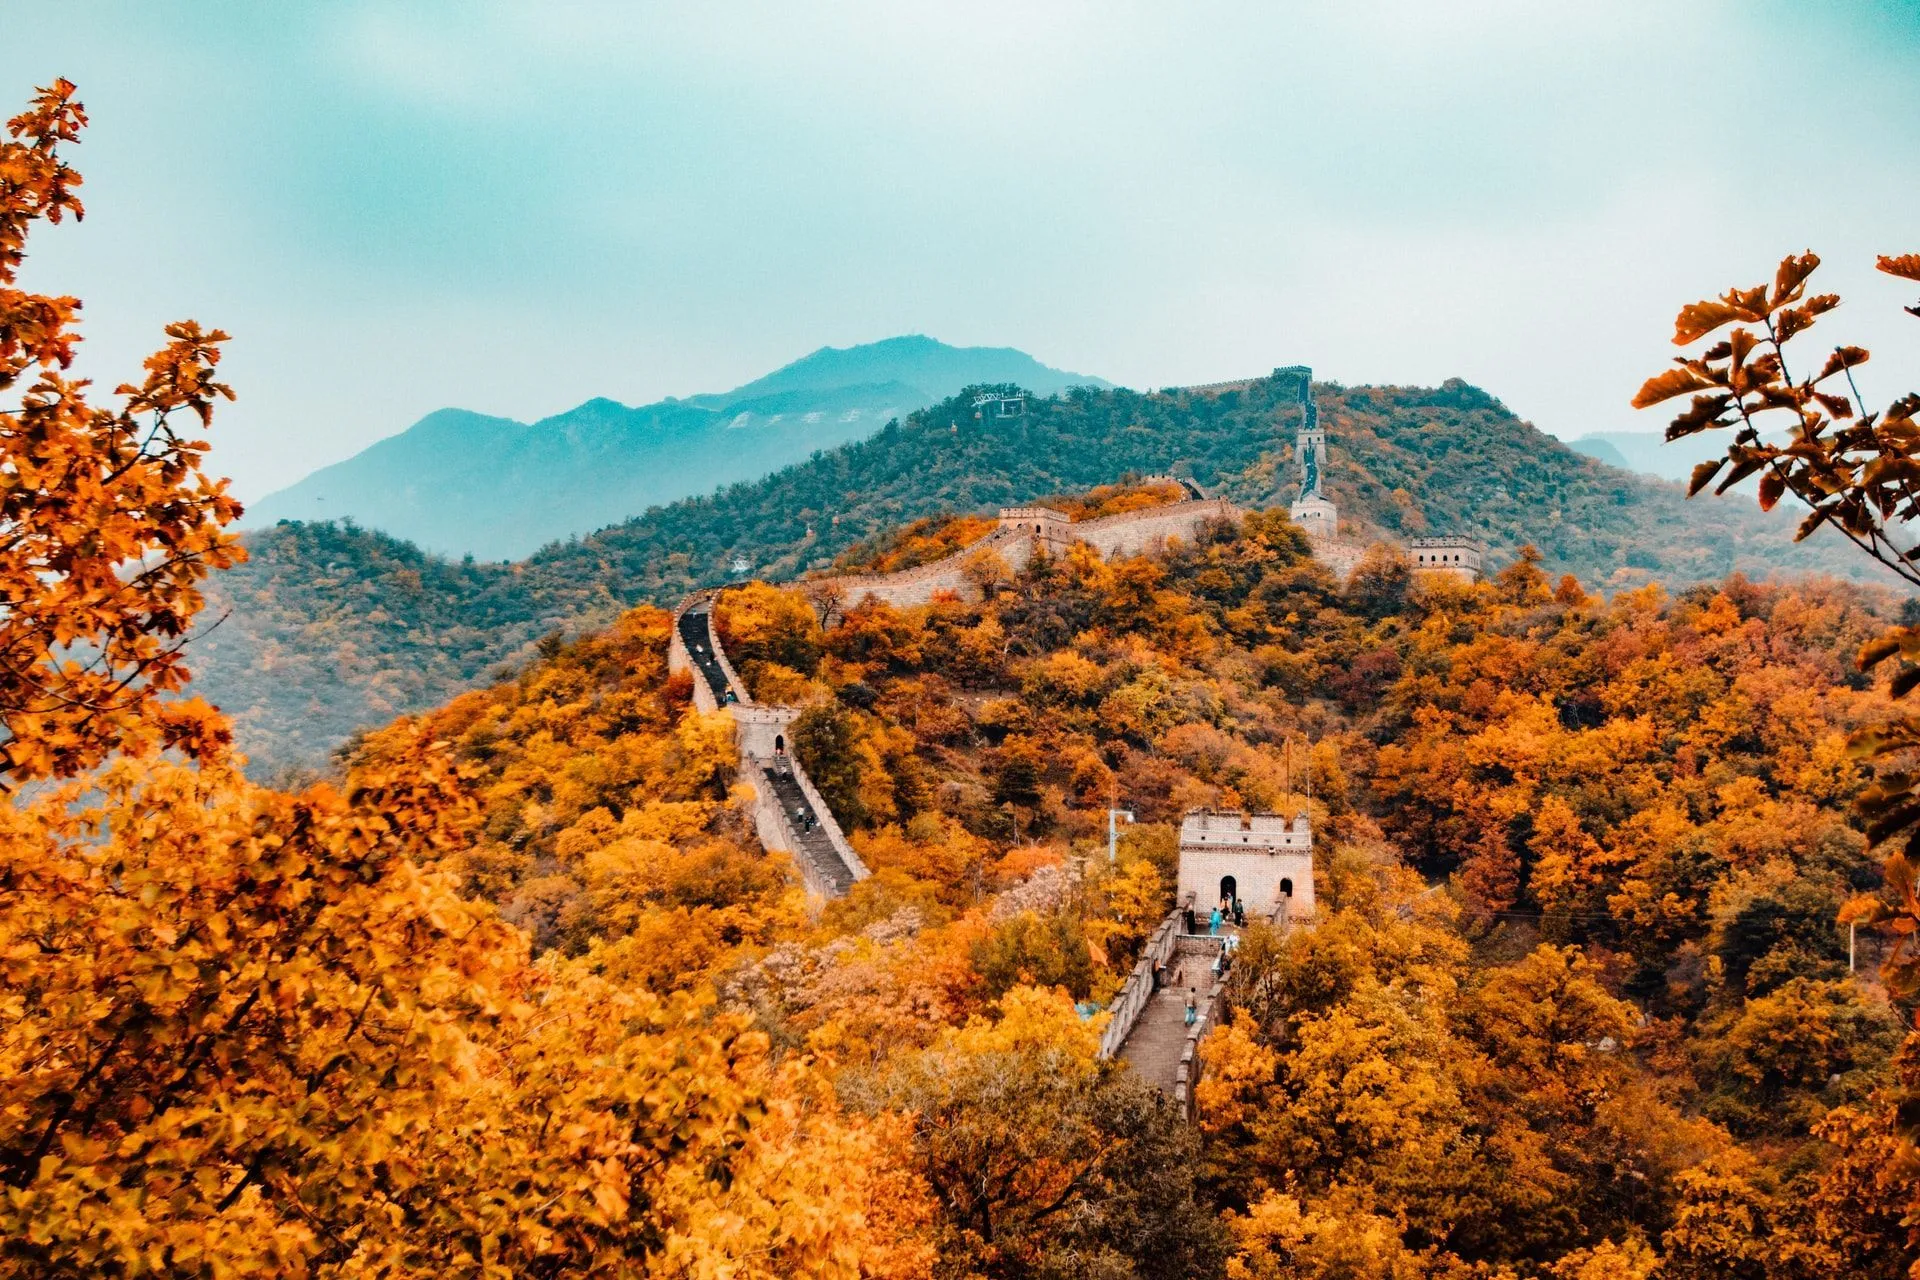 A spectacular orange view of Great Wall of China during autumn